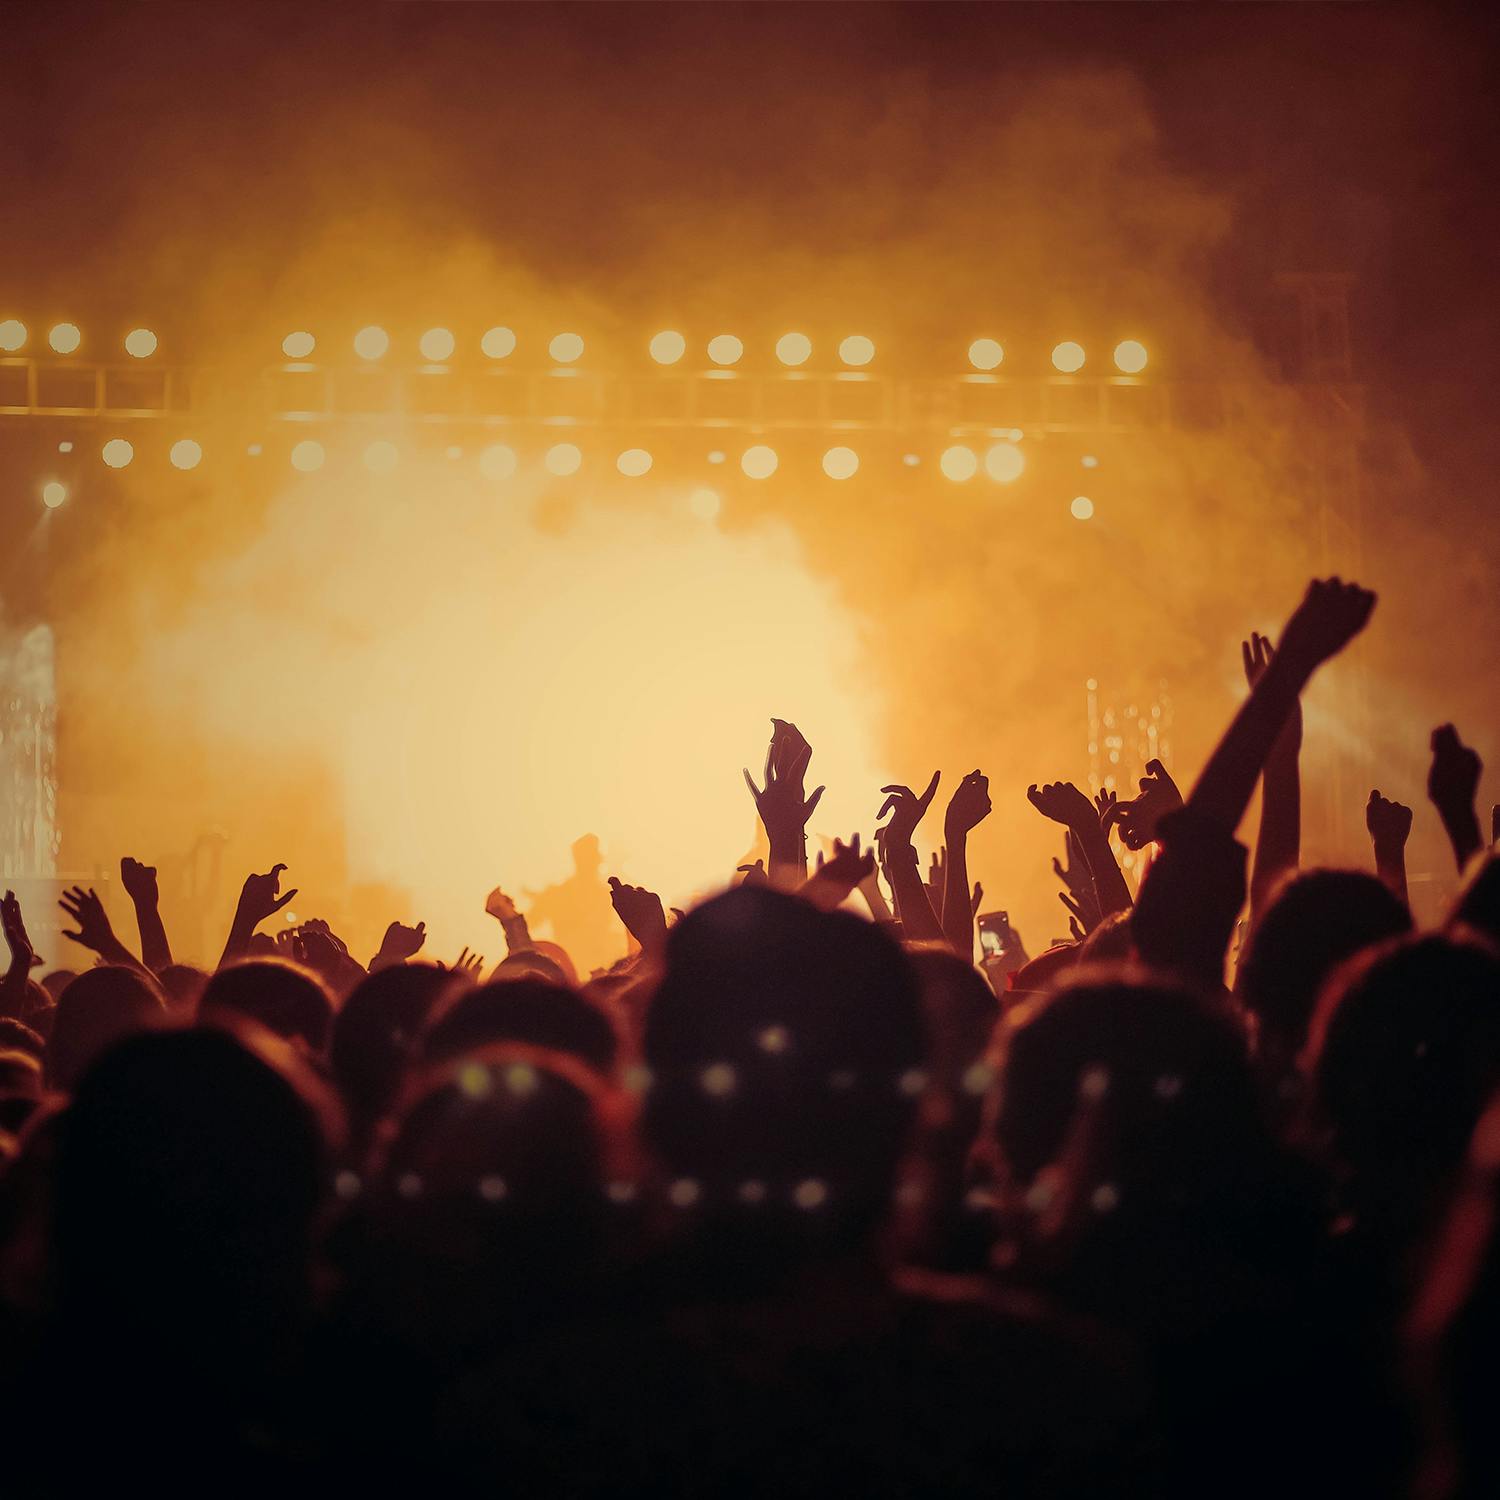 Should we have ‘no talking’ zones at gigs?